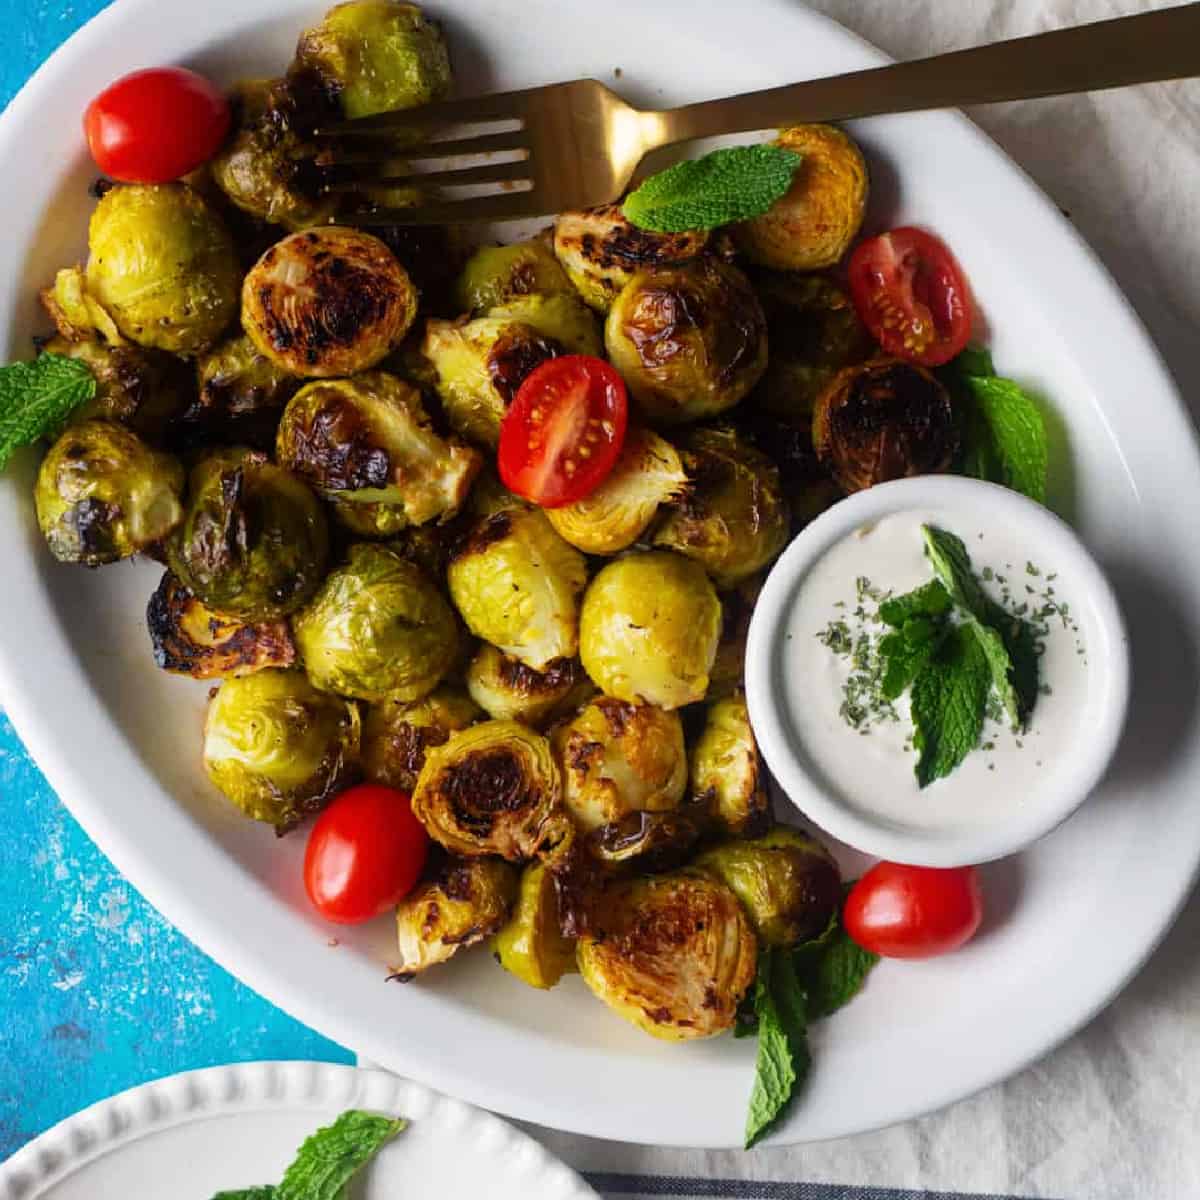 This roasted brussel sprouts recipe is easy and ready in 20 minutes. They're crispy and seasoned with lemon and garlic, making a delicious side dish that everyone loves.
